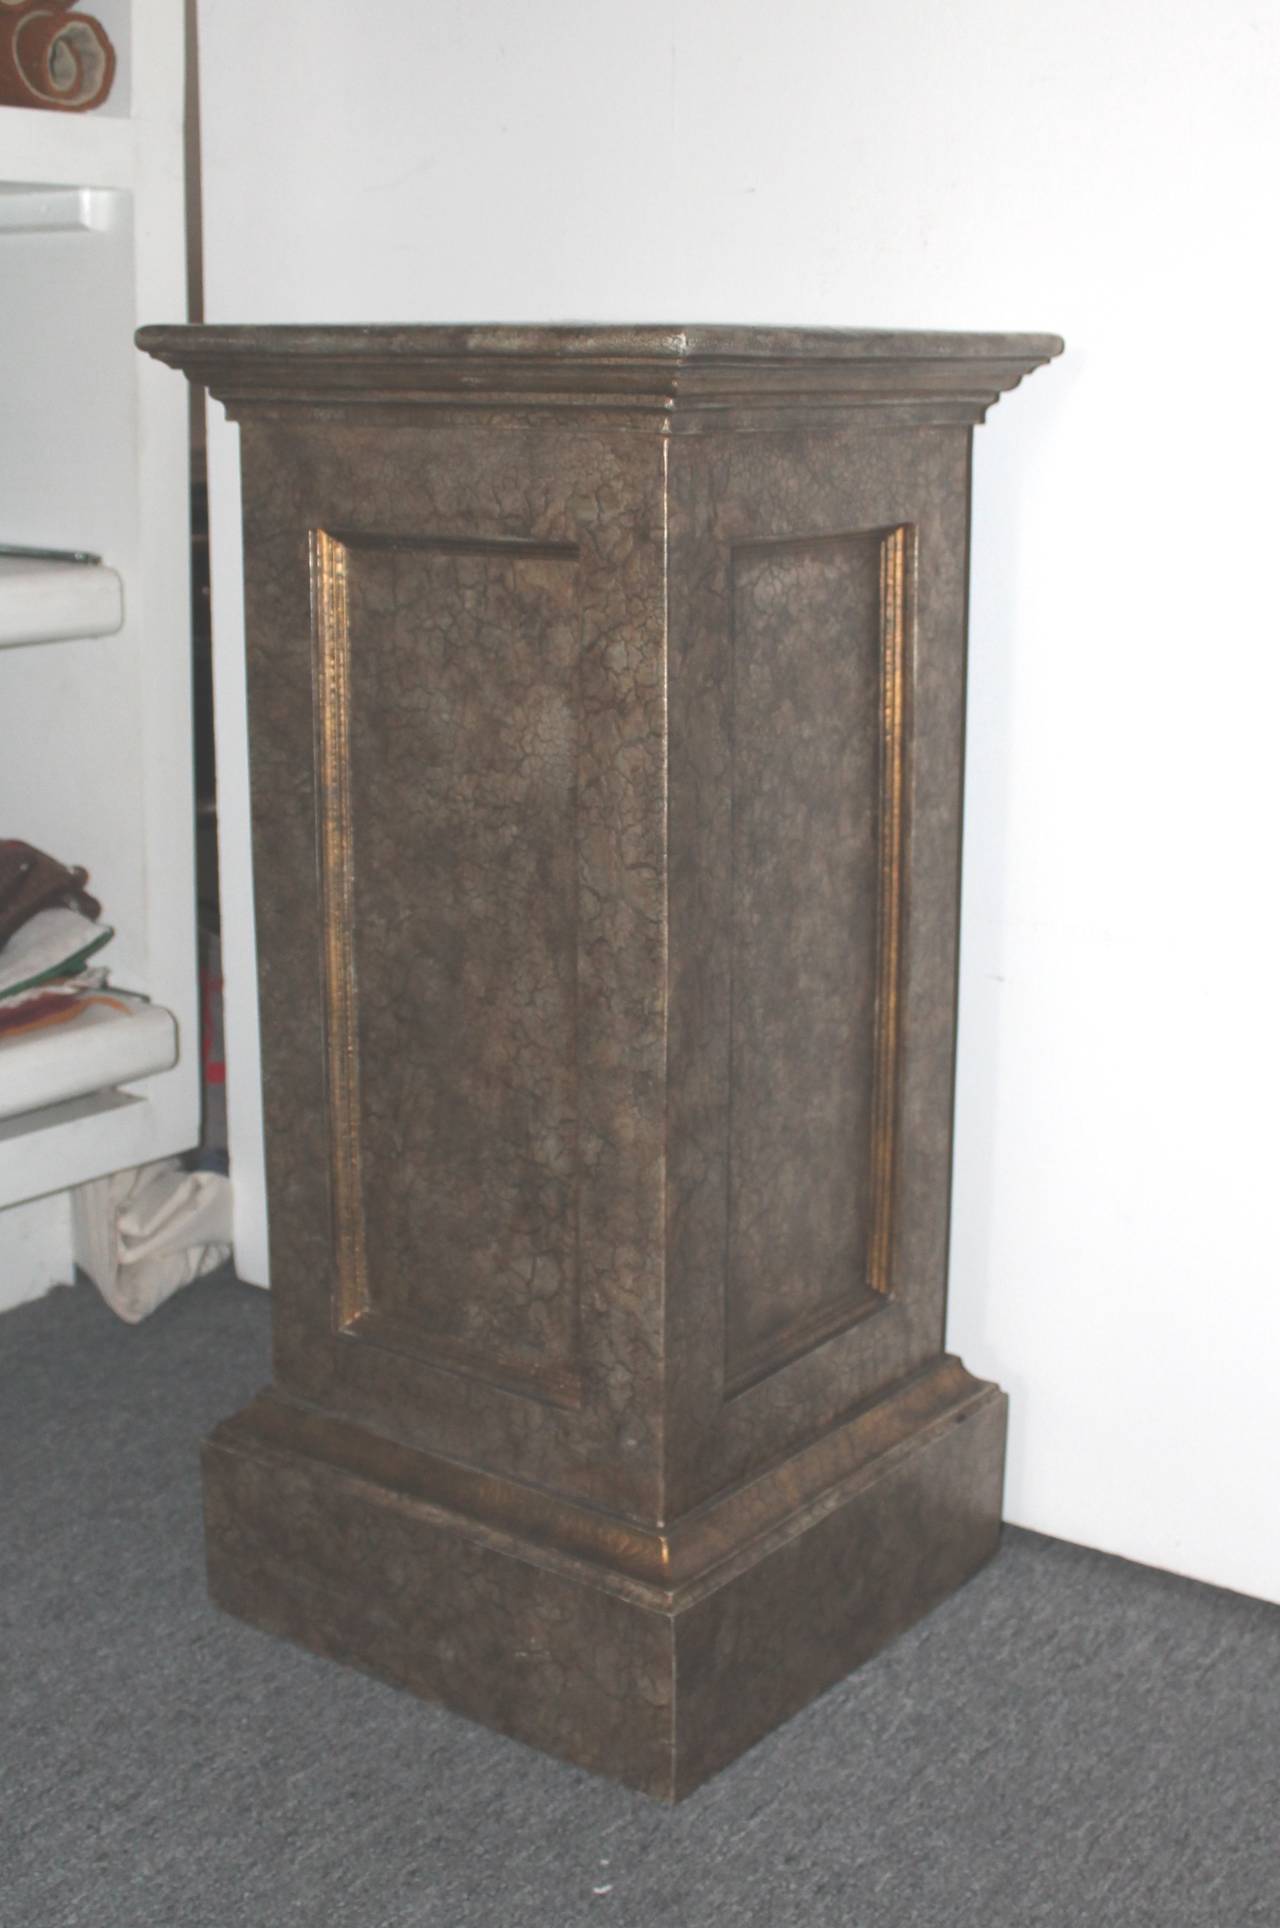 19th Century Pedestal in Original Painted Surface 1